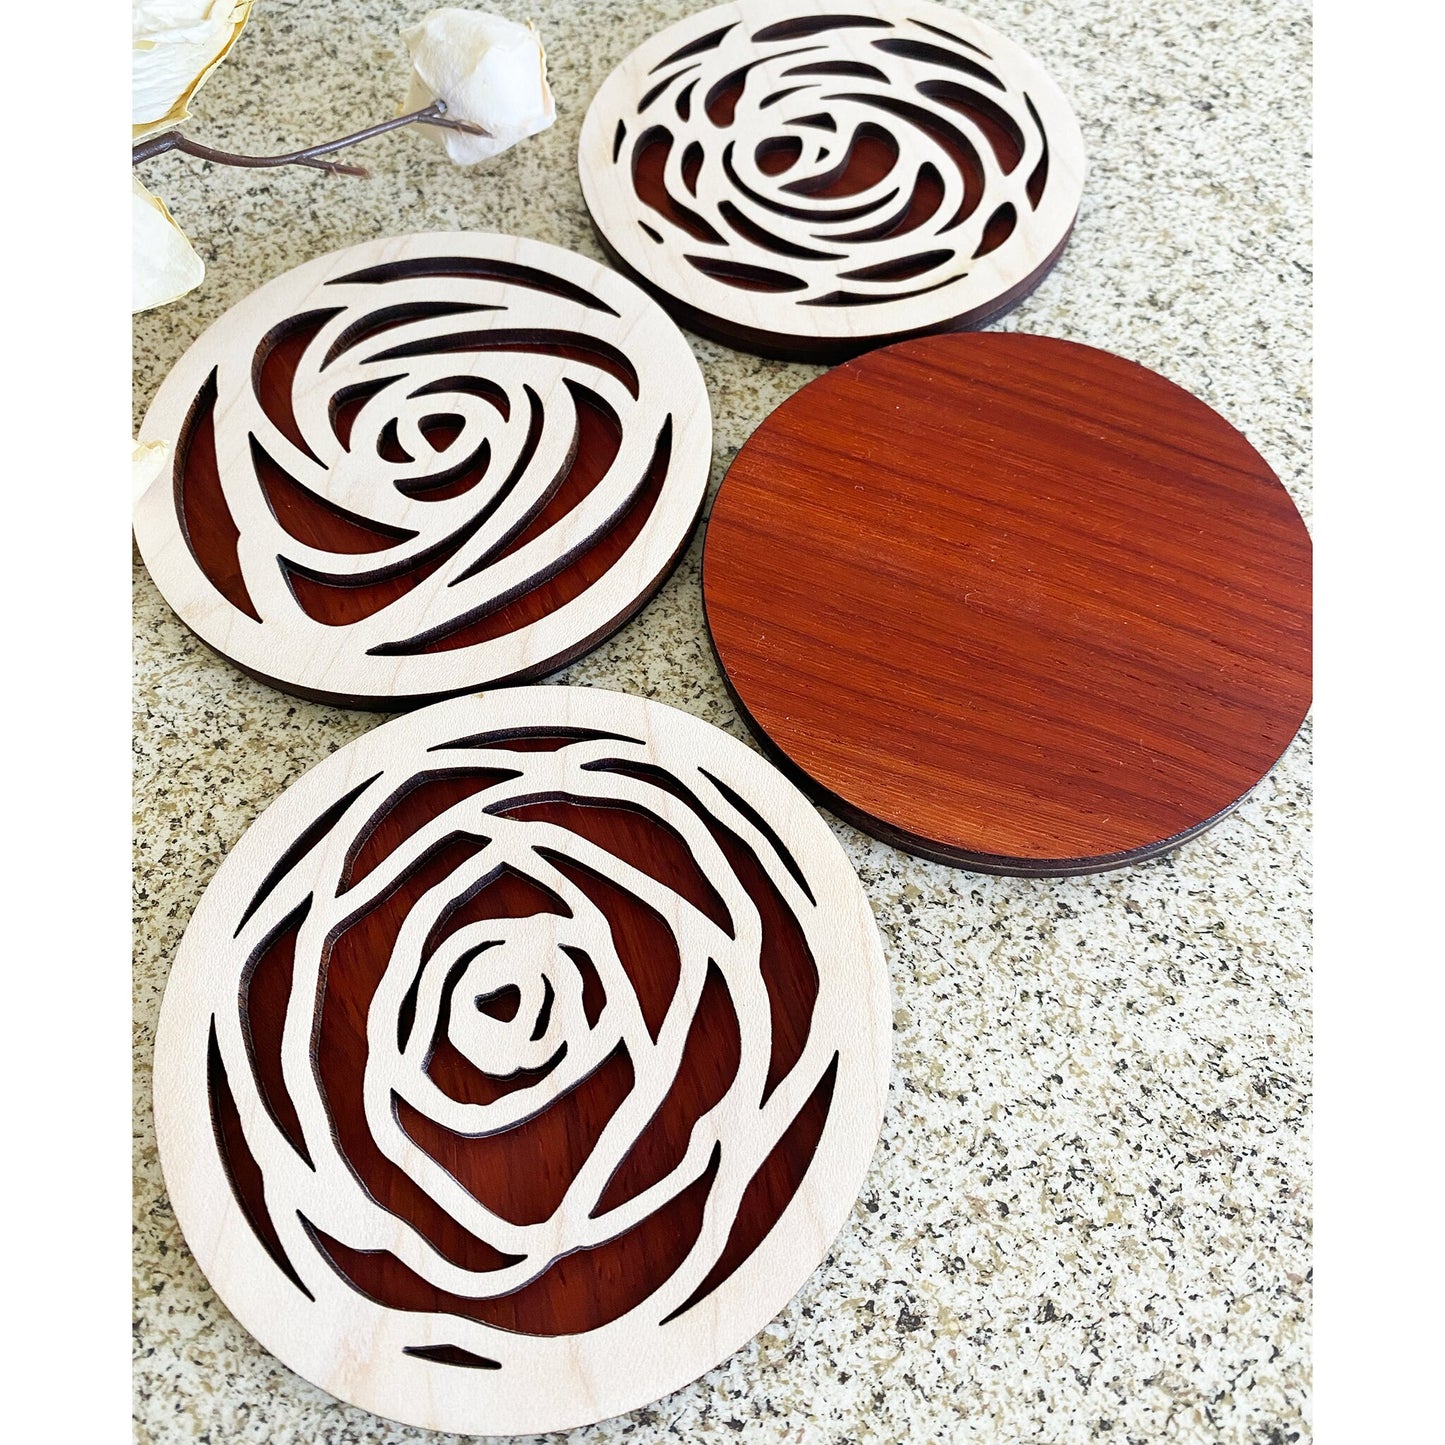 Flower coasters - Flower coaster set - Rose coasters - Rose coasters set- Gifts for women - Contemporary  - Modern - She shed decor